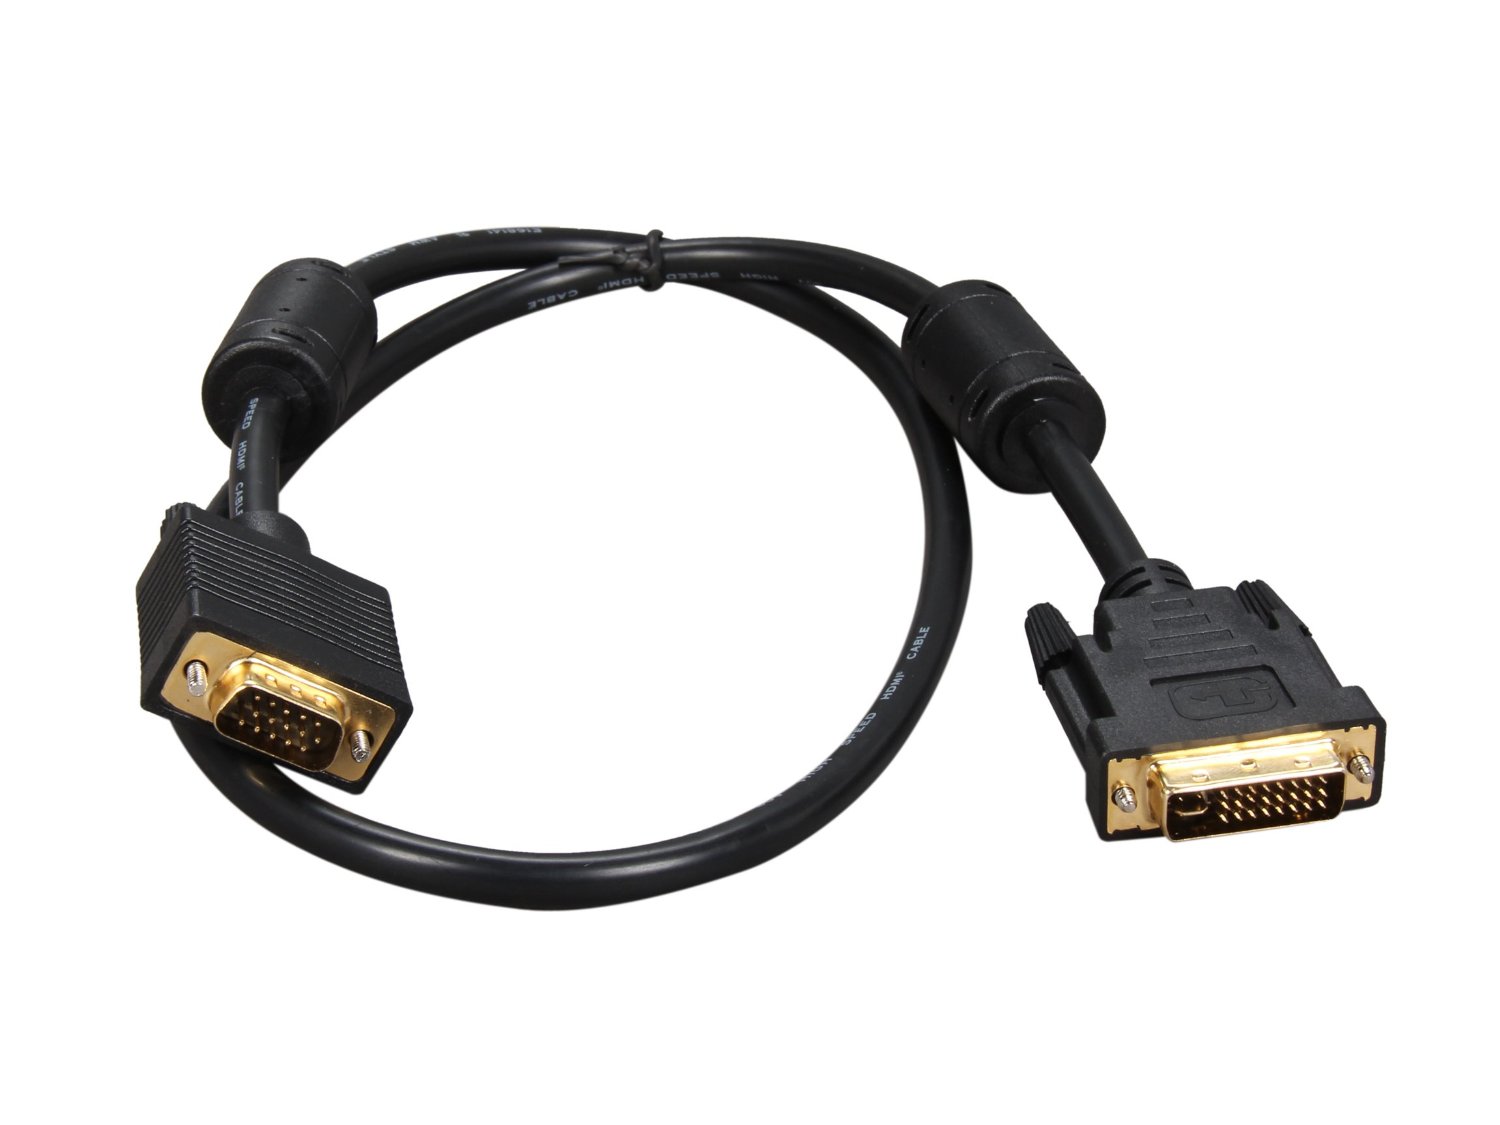 ROSEWILL 3-FT DVI-I MALE TO VGA MALE CABLE (RCDV-11005)